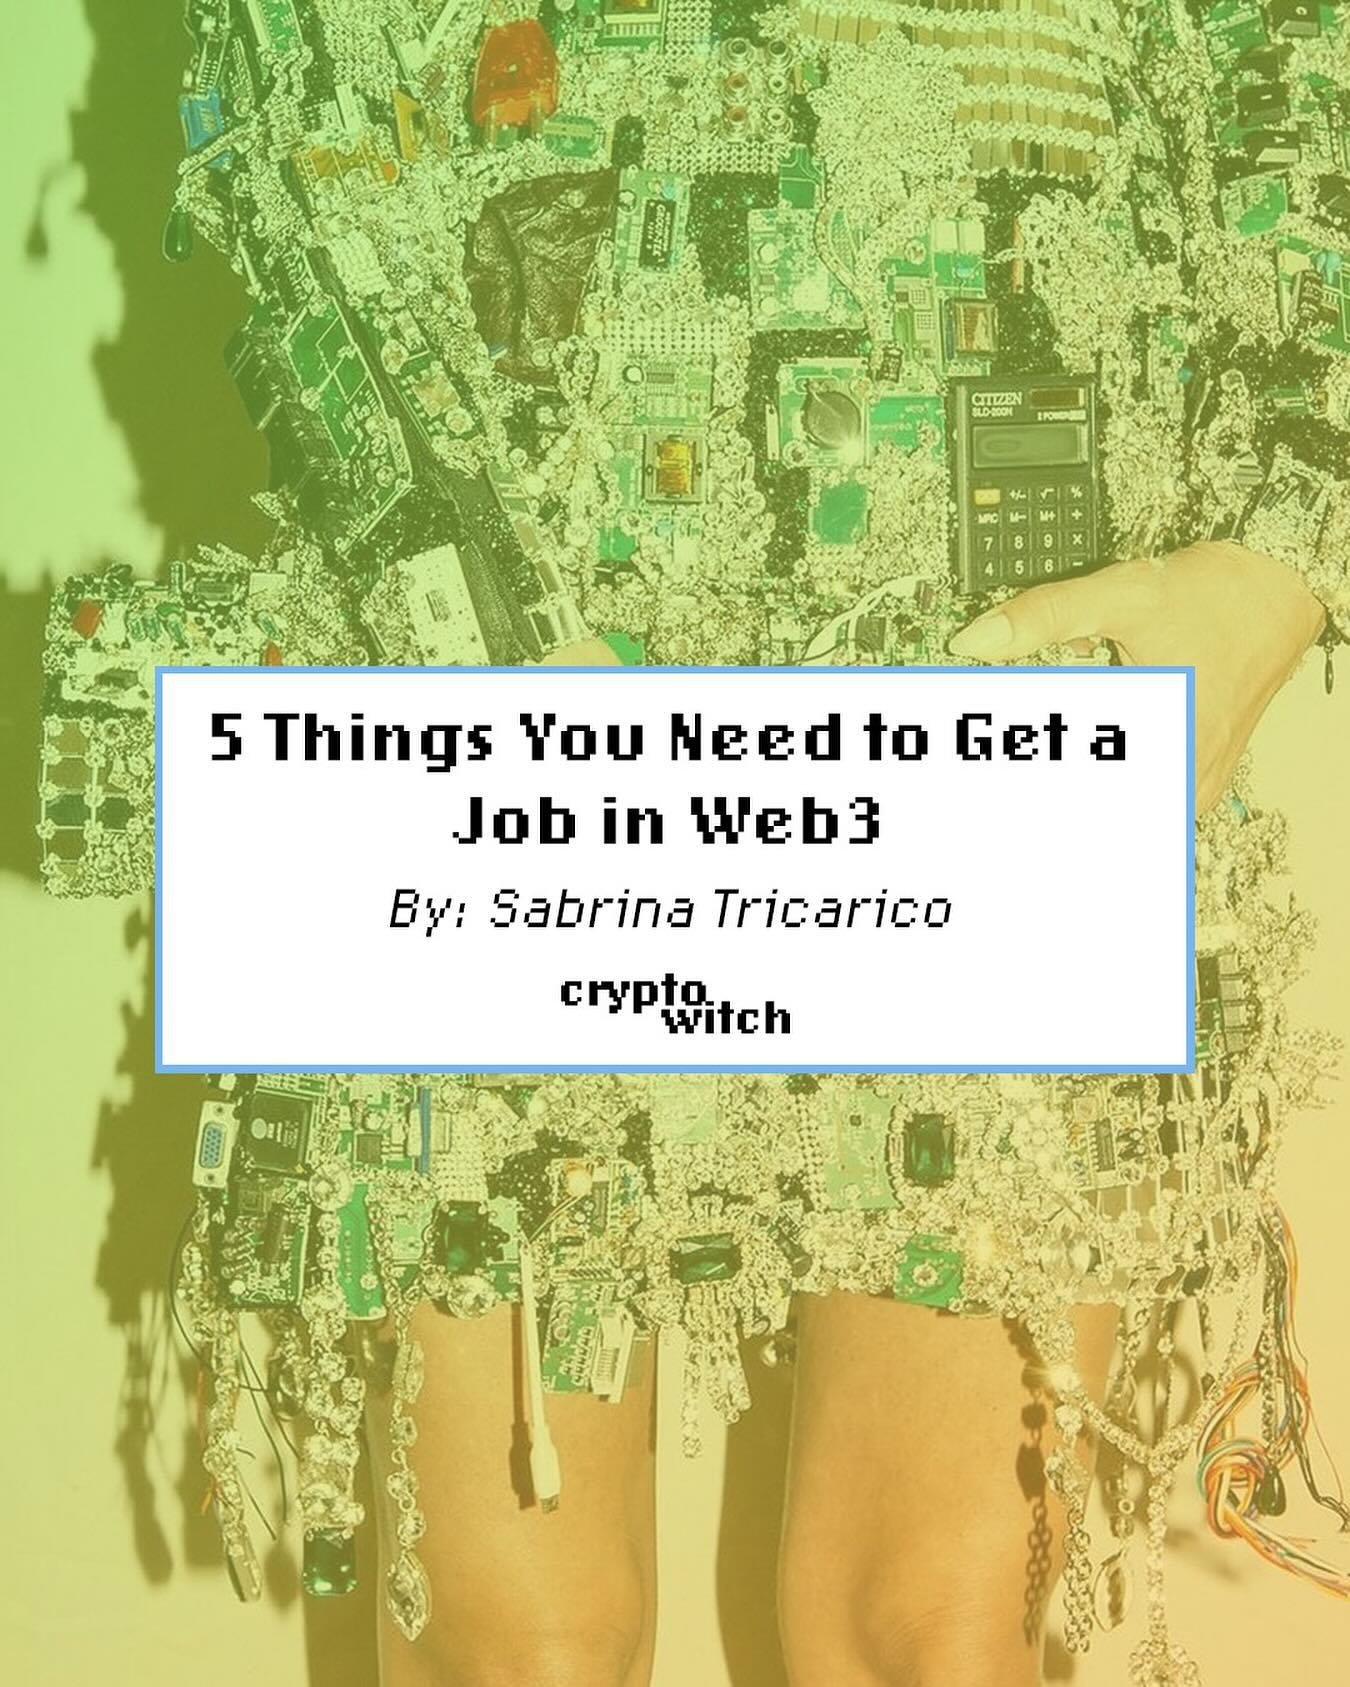 What&rsquo;s the number one question we get asked in our community chat? 💬👀 HOW TO FIND A JOB IN WEB3! 💫 So, start manifesting, because we&rsquo;re hosting a gathering for all our Crypto Witches looking to get hired in Web3 this year! We&rsquo;ll 